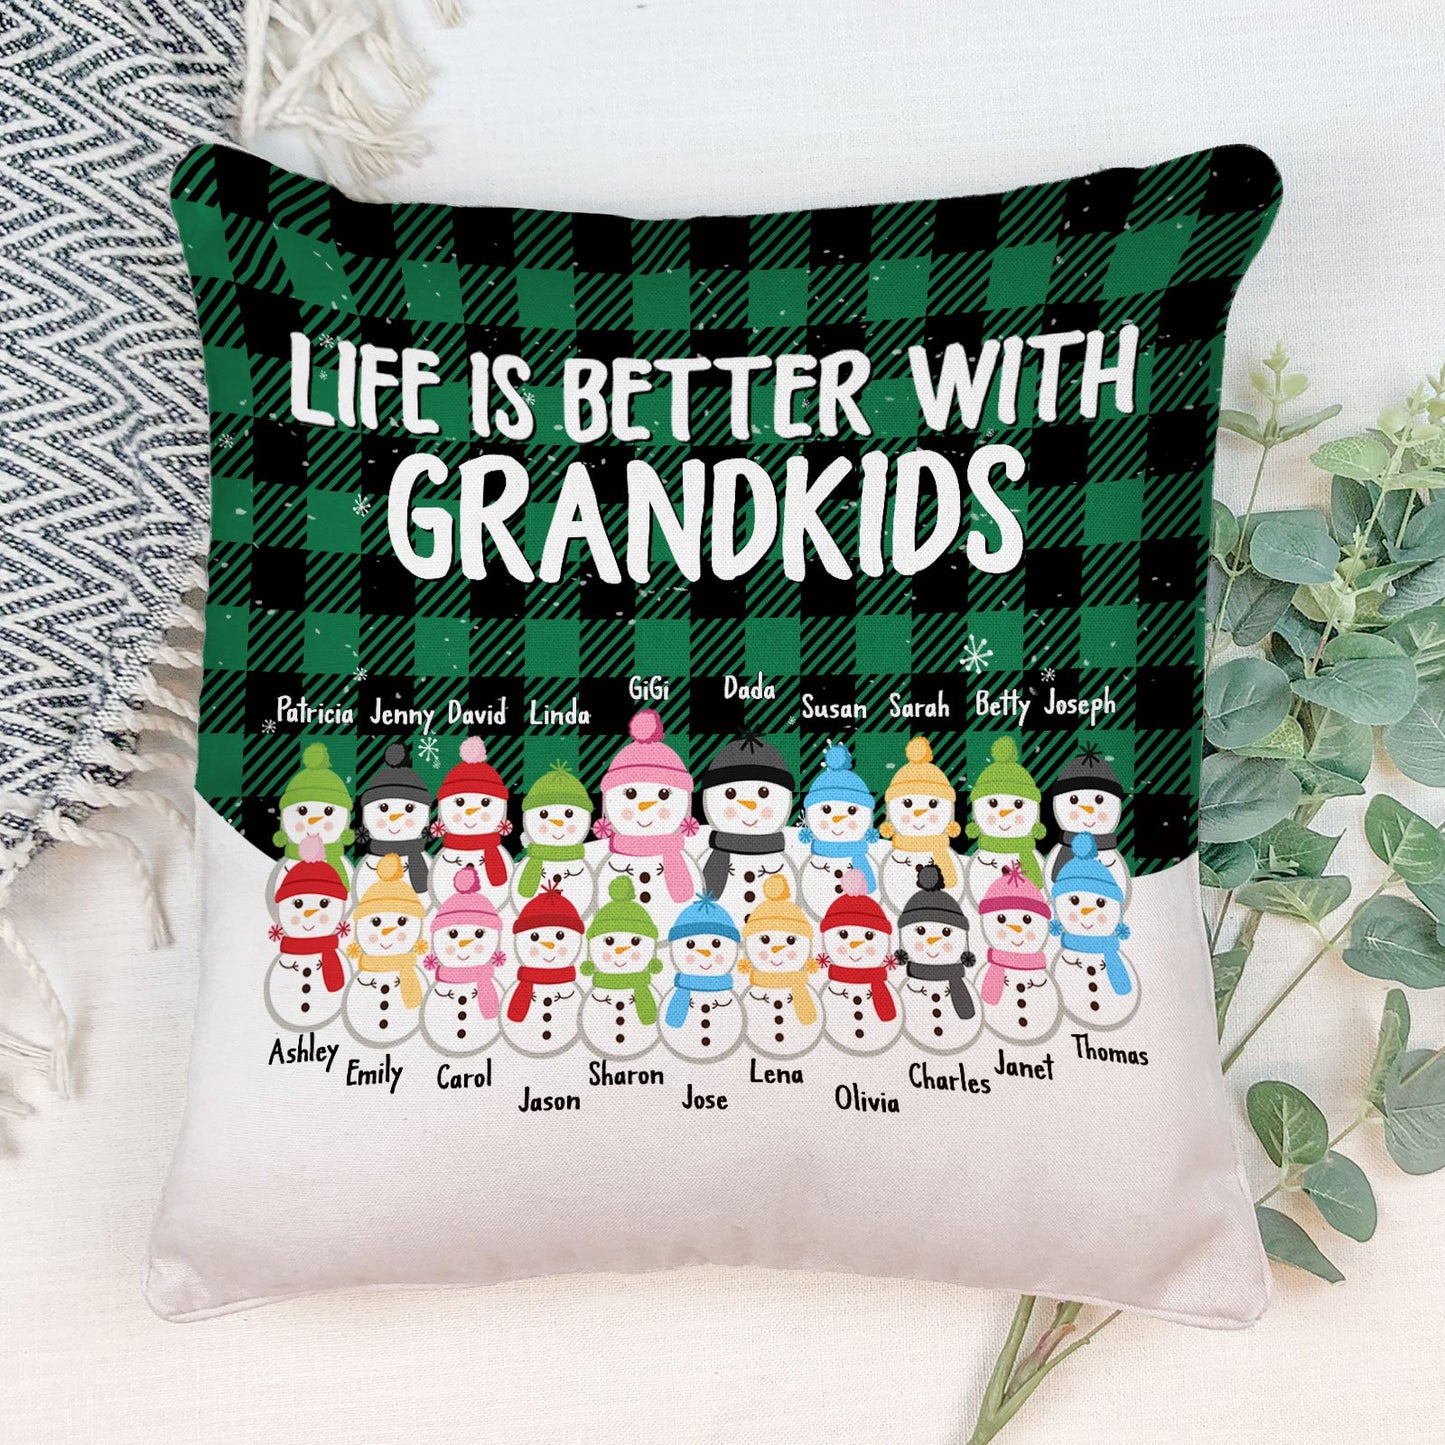 Our Greatest Blessings - Personalized Pillow (Insert Included) - Christmas Gift For Grandma, Grandpa, Grandparents - Snowman Family